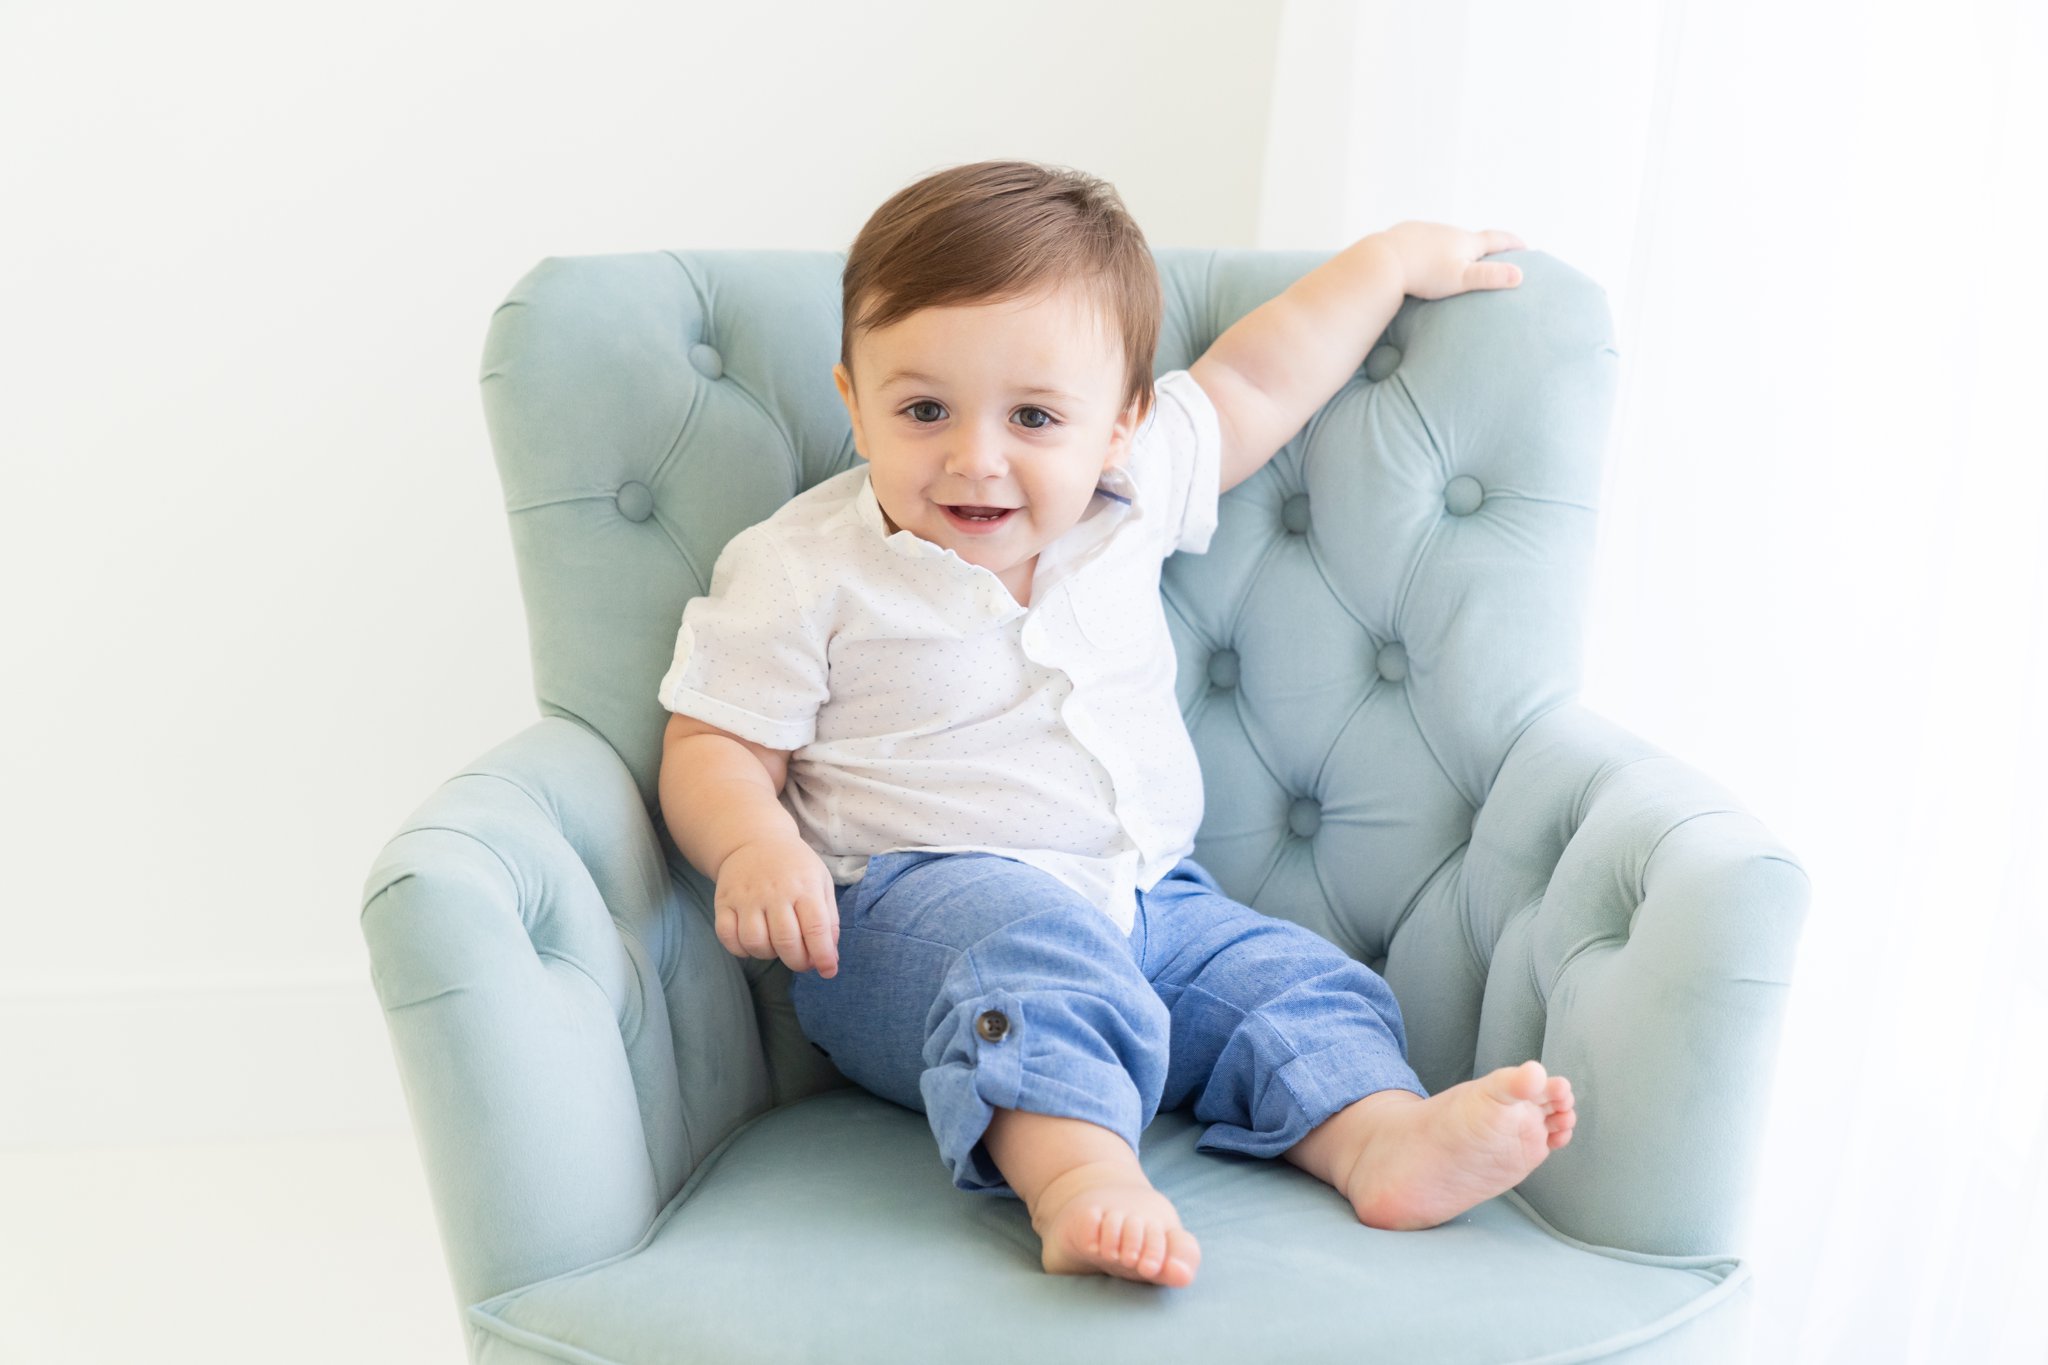 Baby boy sitting in turquoise chair.